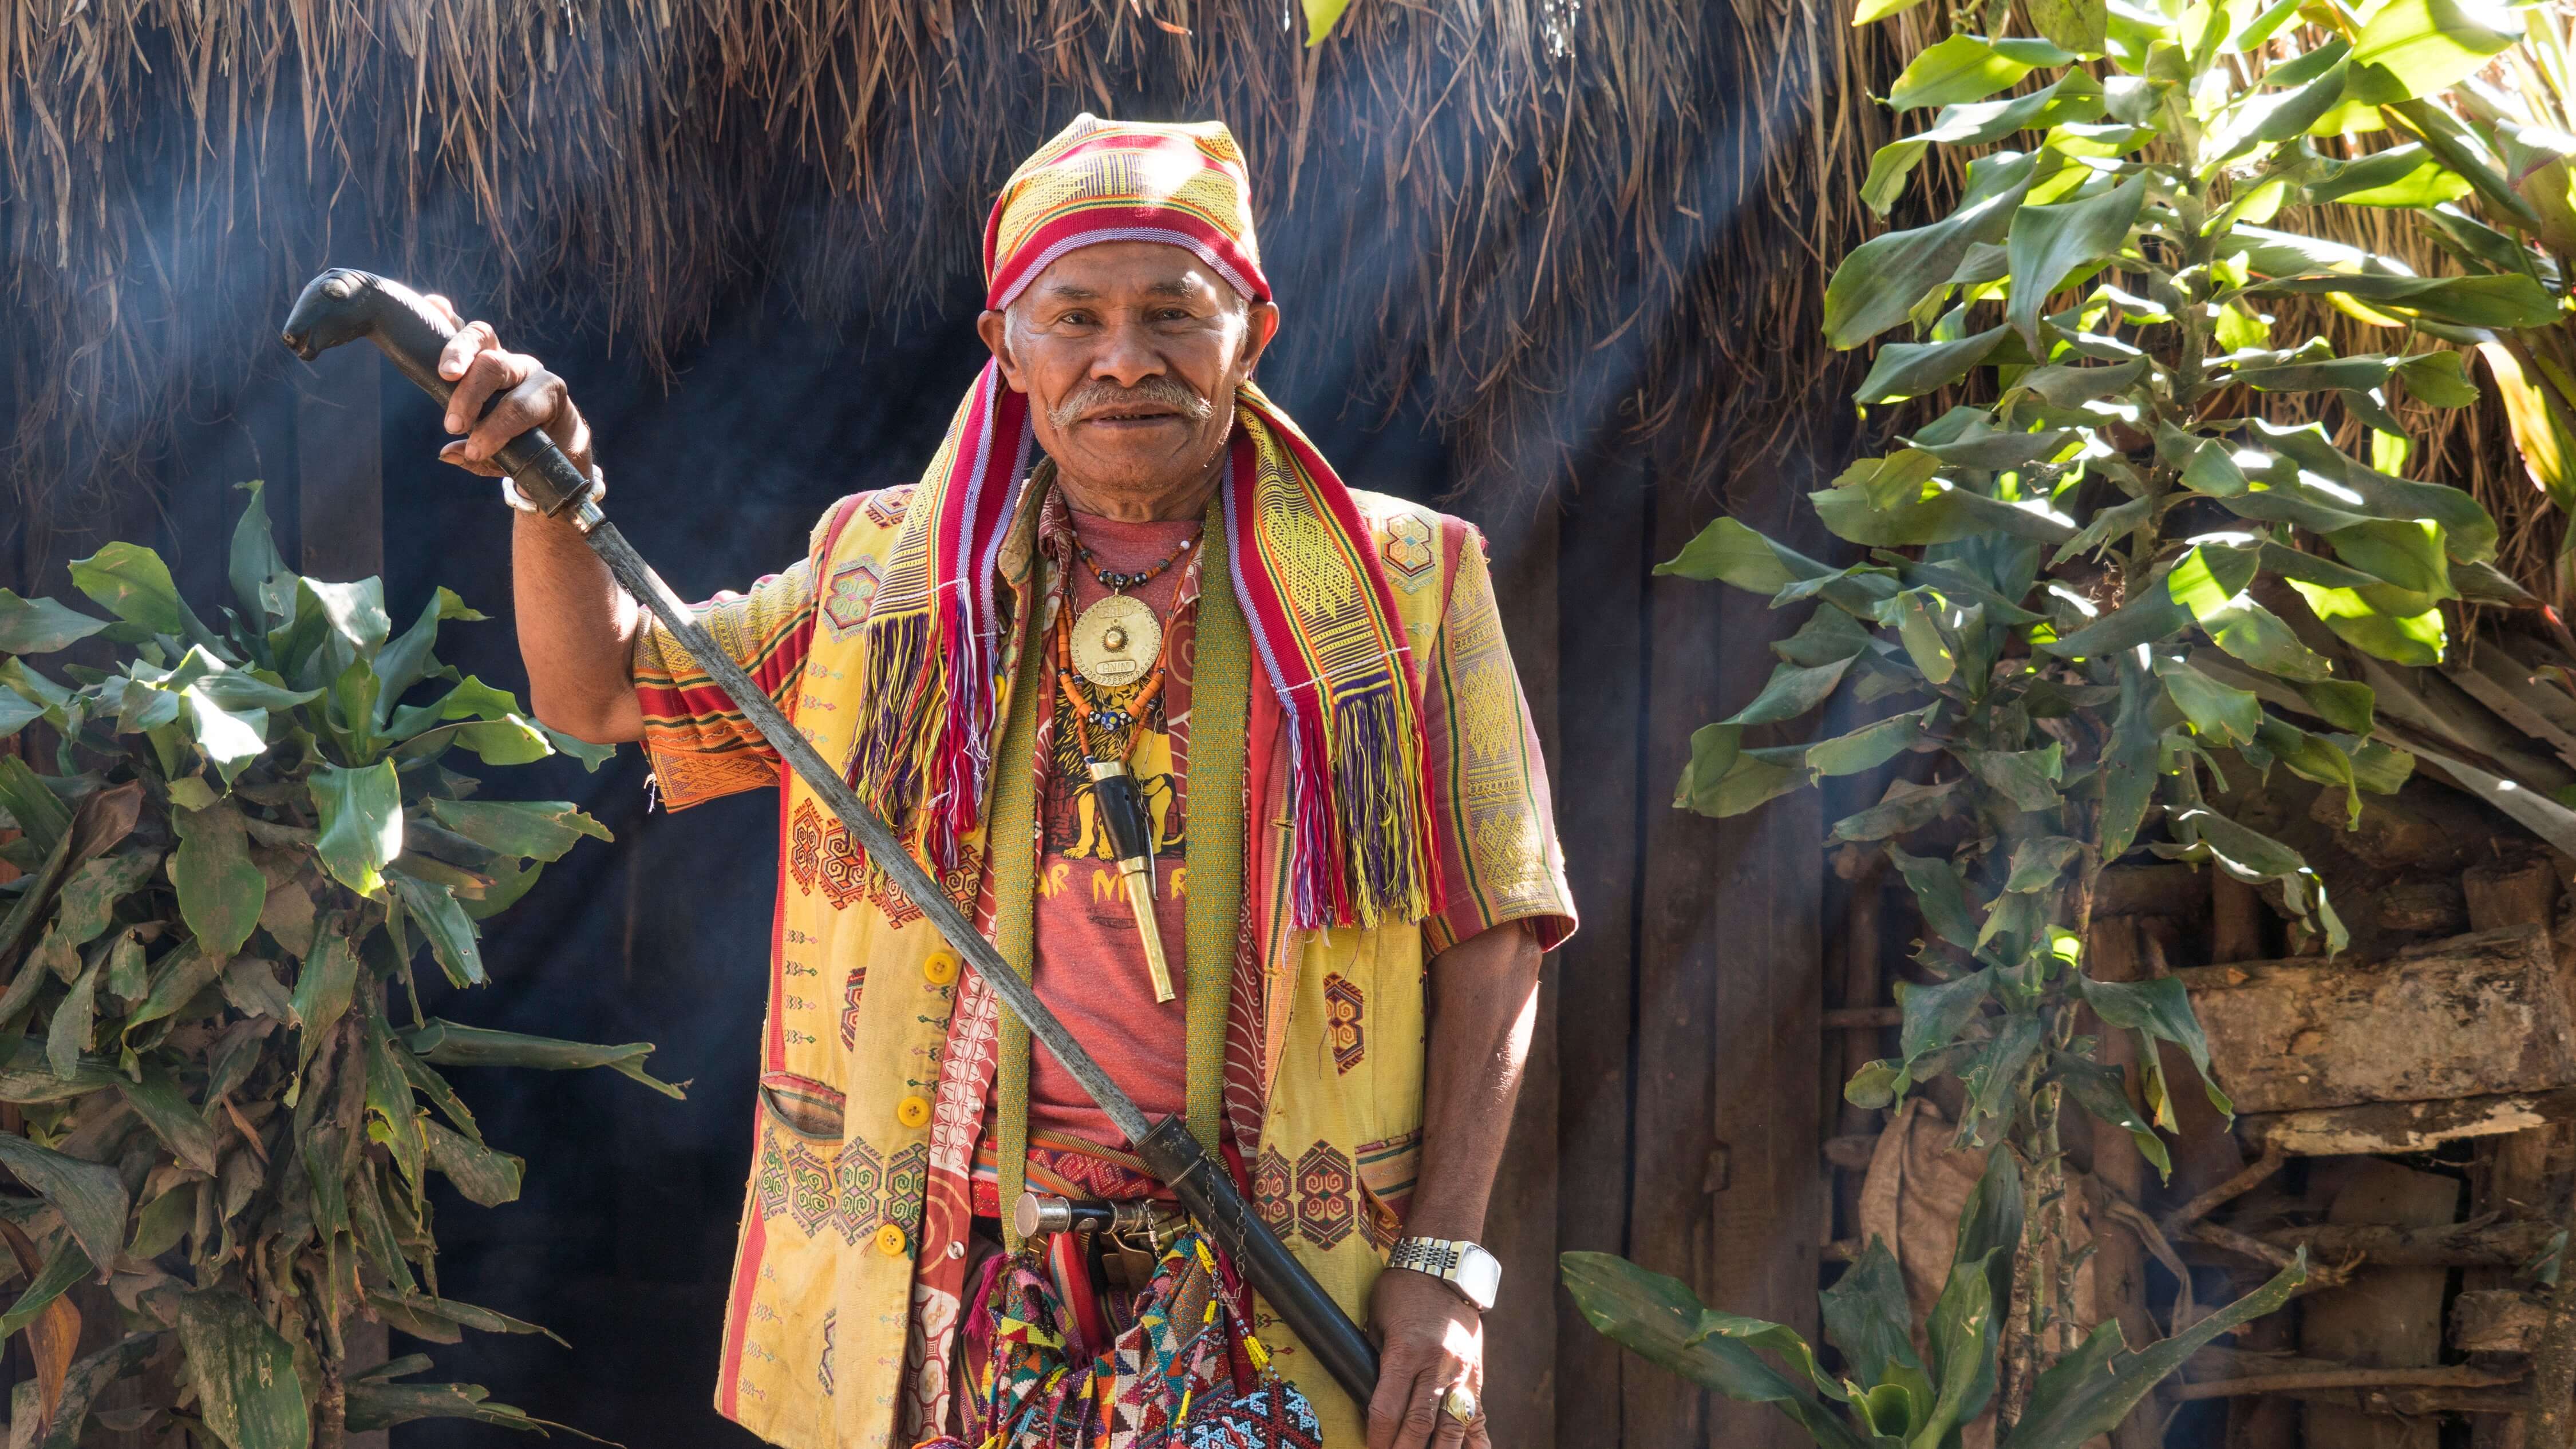 Mateos “Bapatua” Anin, the traditional guardian of Mount Mutis and owner of Homestay Lopo Mutis. Bapatua Anin is a respected cultural figure in Mollo. Photo by Andra Fembriarto